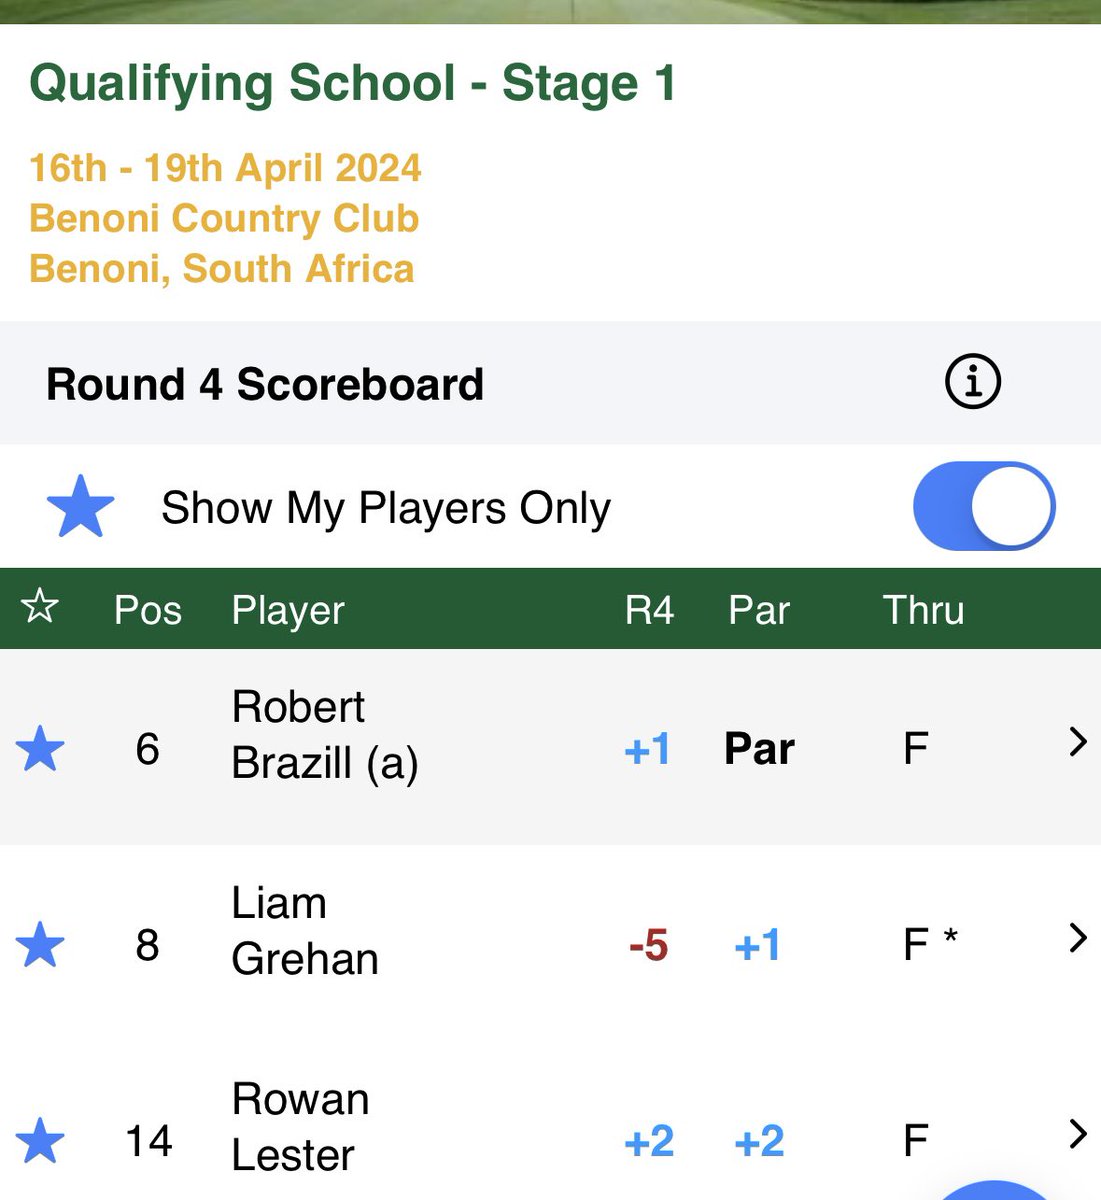 Moving on ☘️☘️☘️ The first part of the job is complete for Rob Brazill, Liam Grehan & Rowan Lester as they will all progress from first stage to final stage of Sunshine tour Q-School. Rob finishes in T6, Liam with a great final round 5 under finishes in T8 and Rowan T14 well